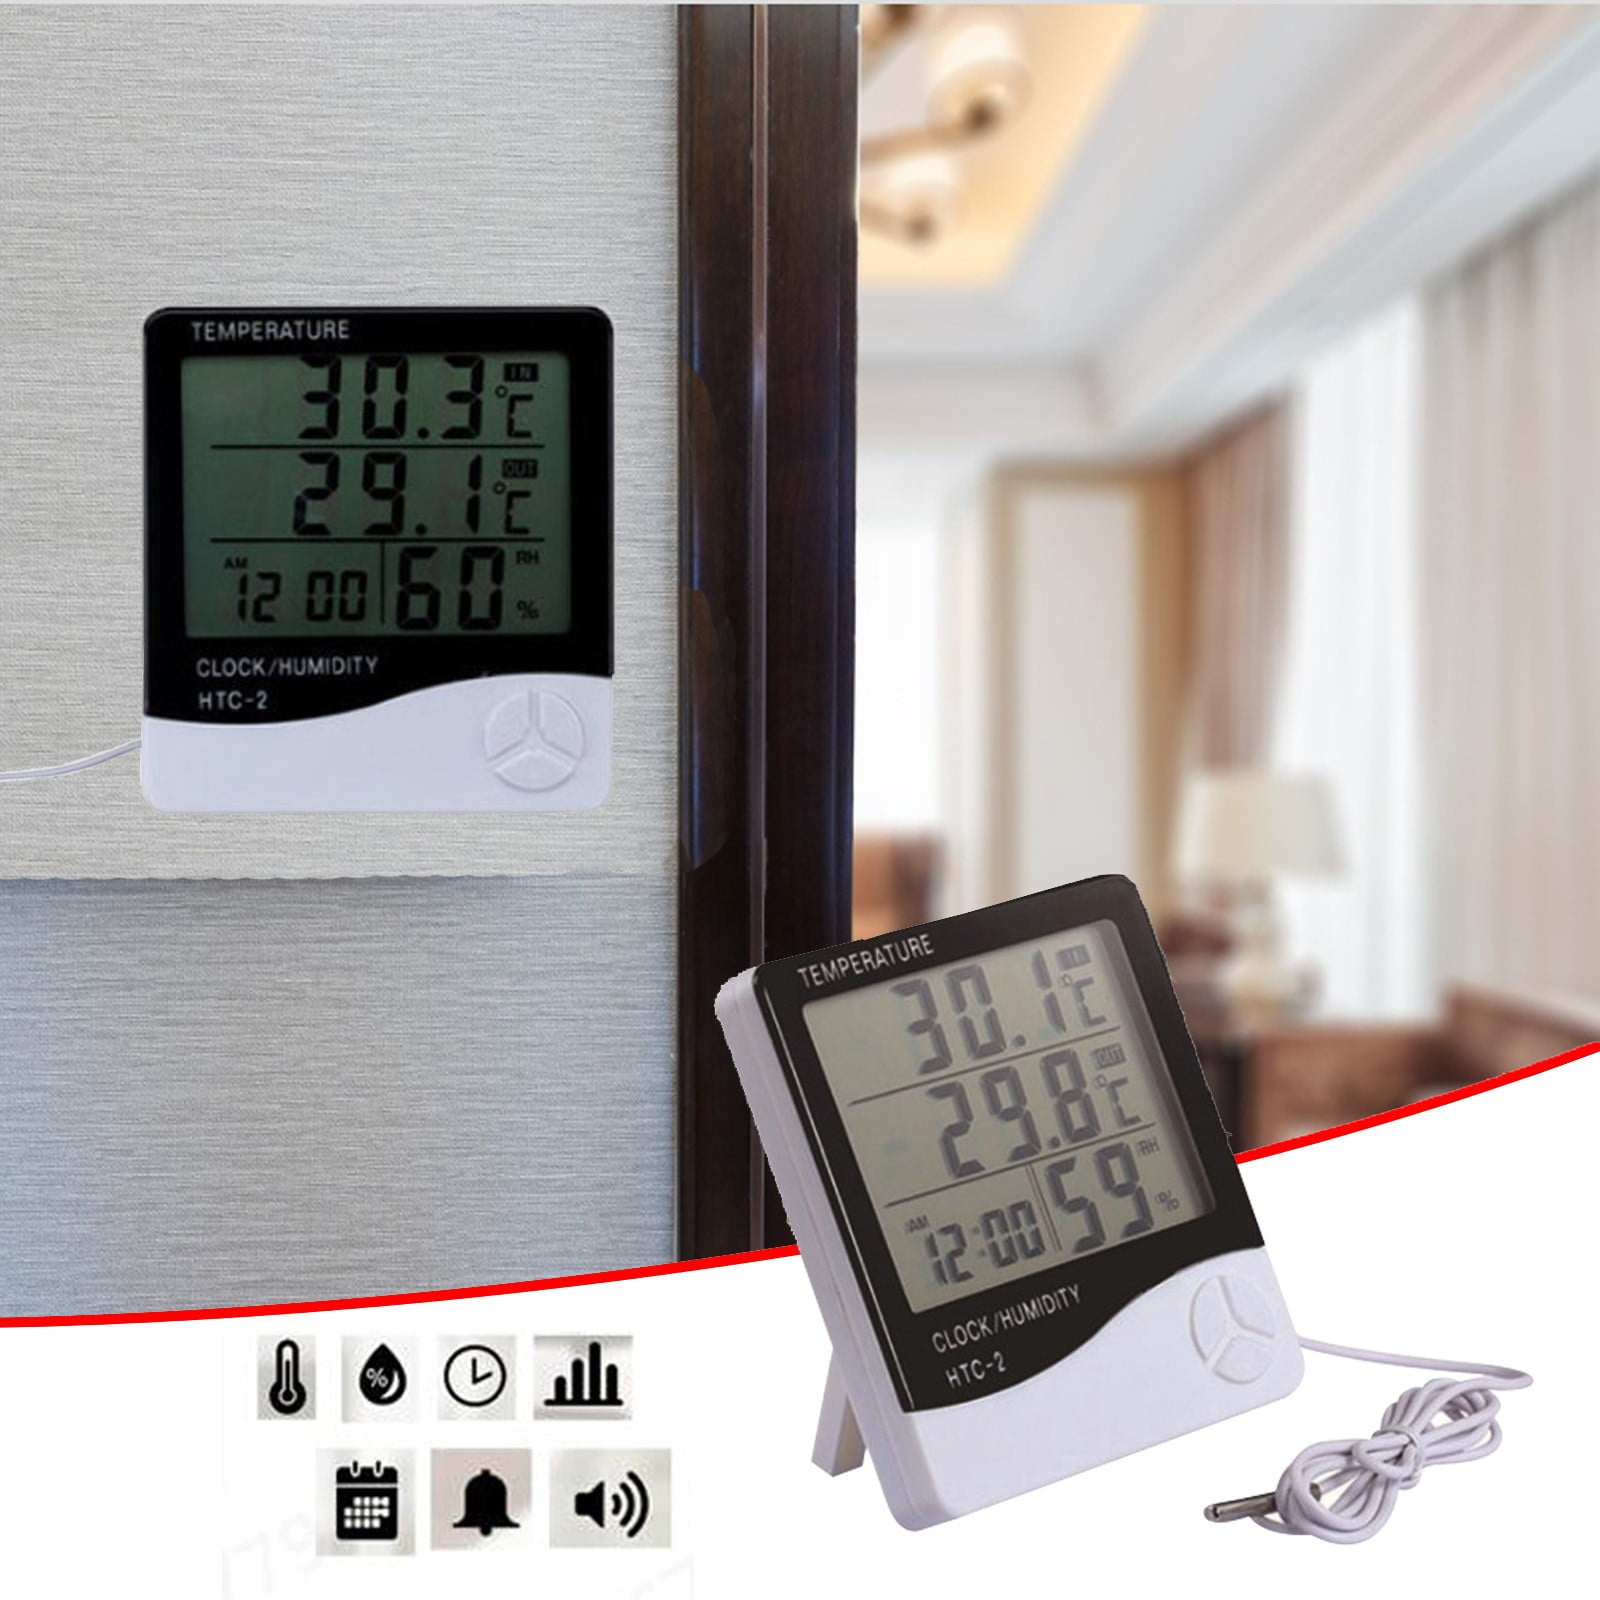 Thermopro Tp358w Hygrometer Indoor Thermometer For Home (ios